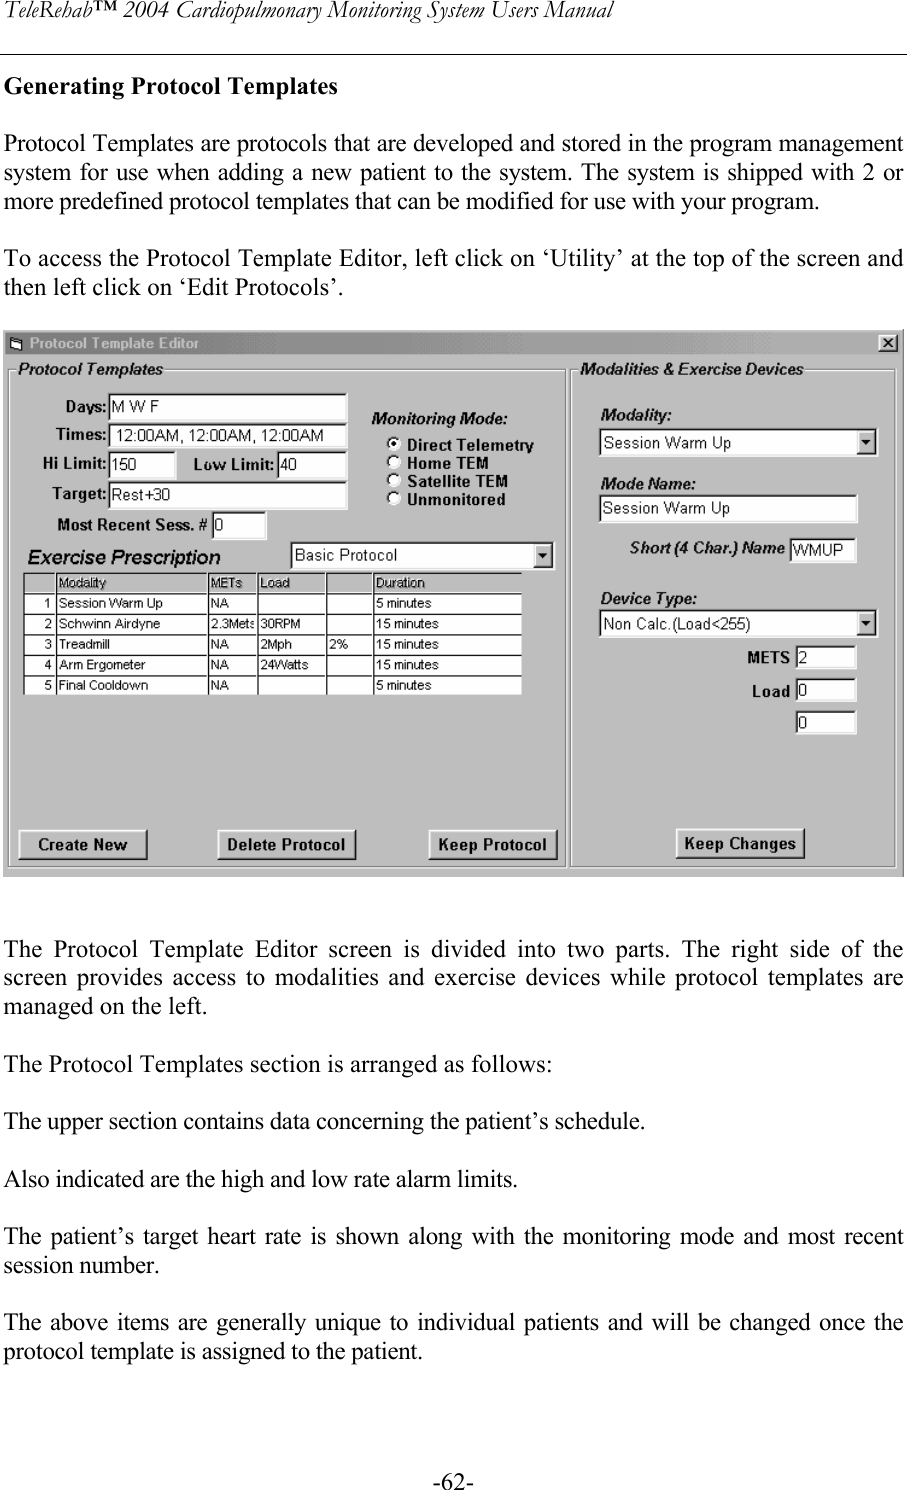 TeleRehab™ 2004 Cardiopulmonary Monitoring System Users Manual    -62-Generating Protocol Templates  Protocol Templates are protocols that are developed and stored in the program management system for use when adding a new patient to the system. The system is shipped with 2 or more predefined protocol templates that can be modified for use with your program.  To access the Protocol Template Editor, left click on ‘Utility’ at the top of the screen and then left click on ‘Edit Protocols’.     The Protocol Template Editor screen is divided into two parts. The right side of the screen provides access to modalities and exercise devices while protocol templates are managed on the left.  The Protocol Templates section is arranged as follows:  The upper section contains data concerning the patient’s schedule.   Also indicated are the high and low rate alarm limits.  The patient’s target heart rate is shown along with the monitoring mode and most recent session number.  The above items are generally unique to individual patients and will be changed once the protocol template is assigned to the patient.  